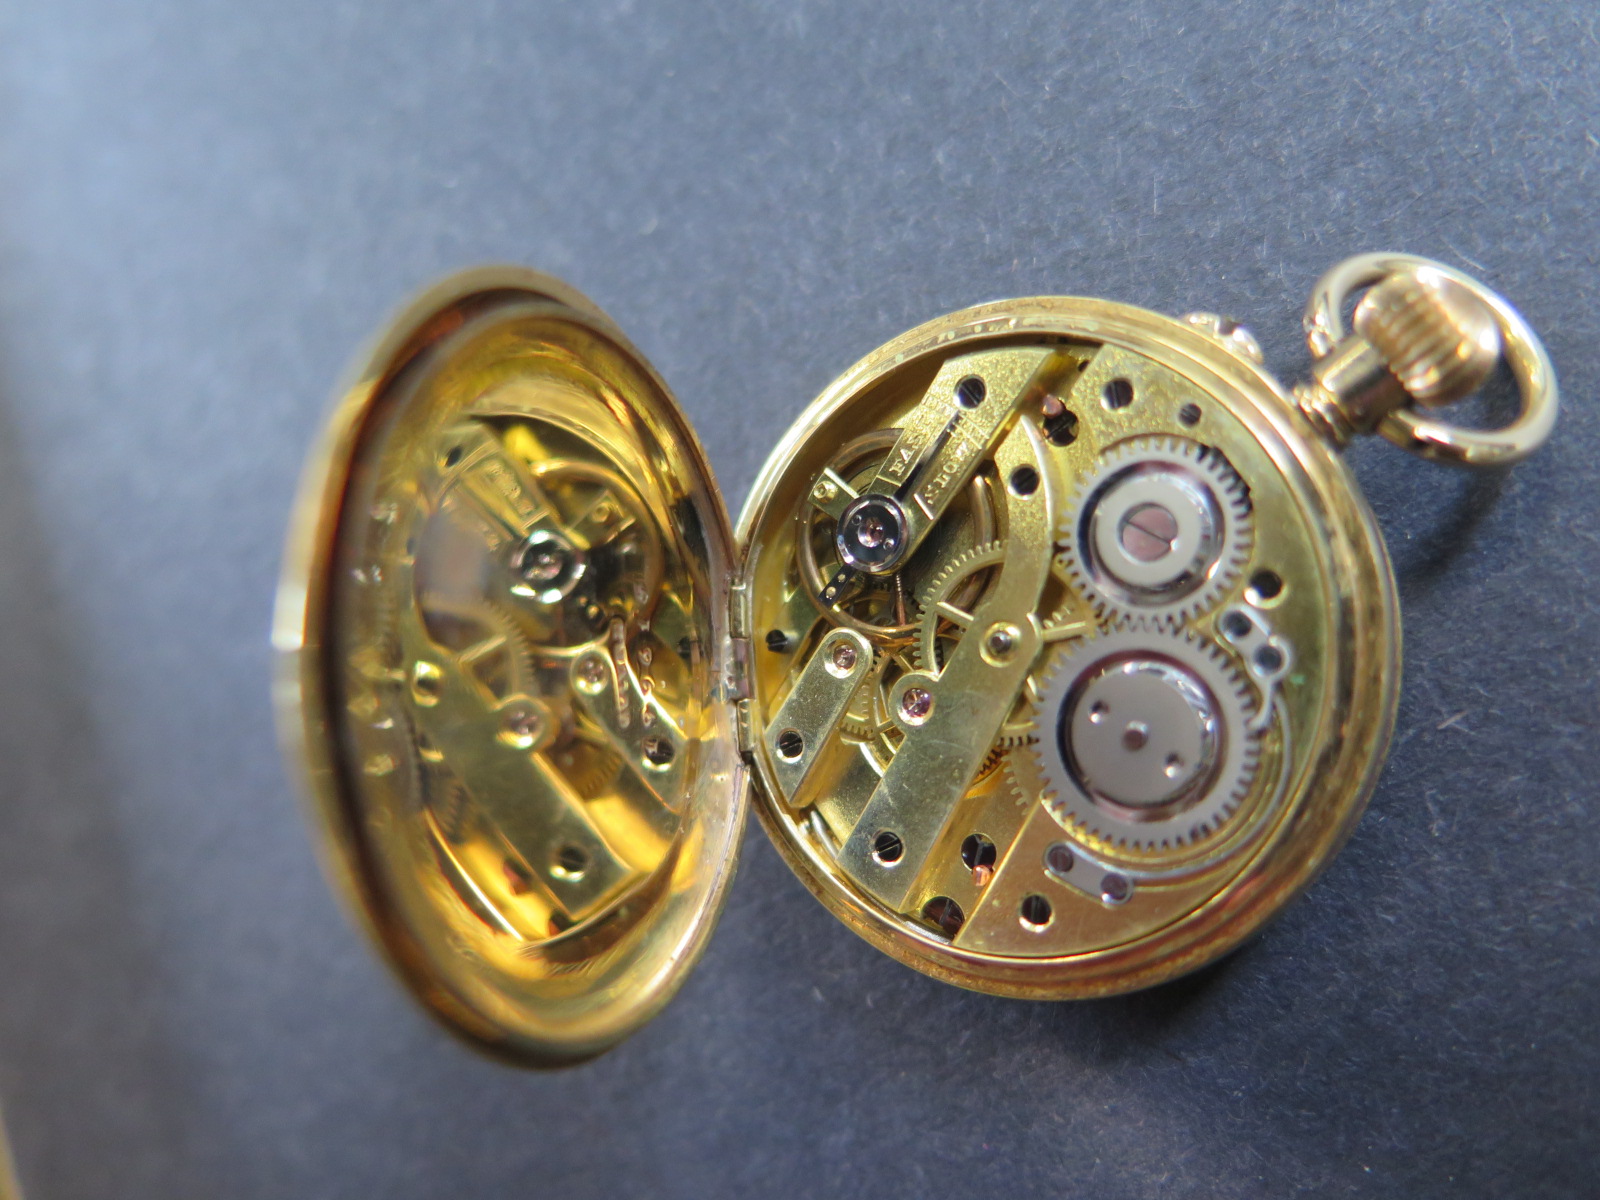 An 18ct yellow gold half hunter pocket watch - 35mm diameter, S Smith & Son with plated movement - Image 5 of 5